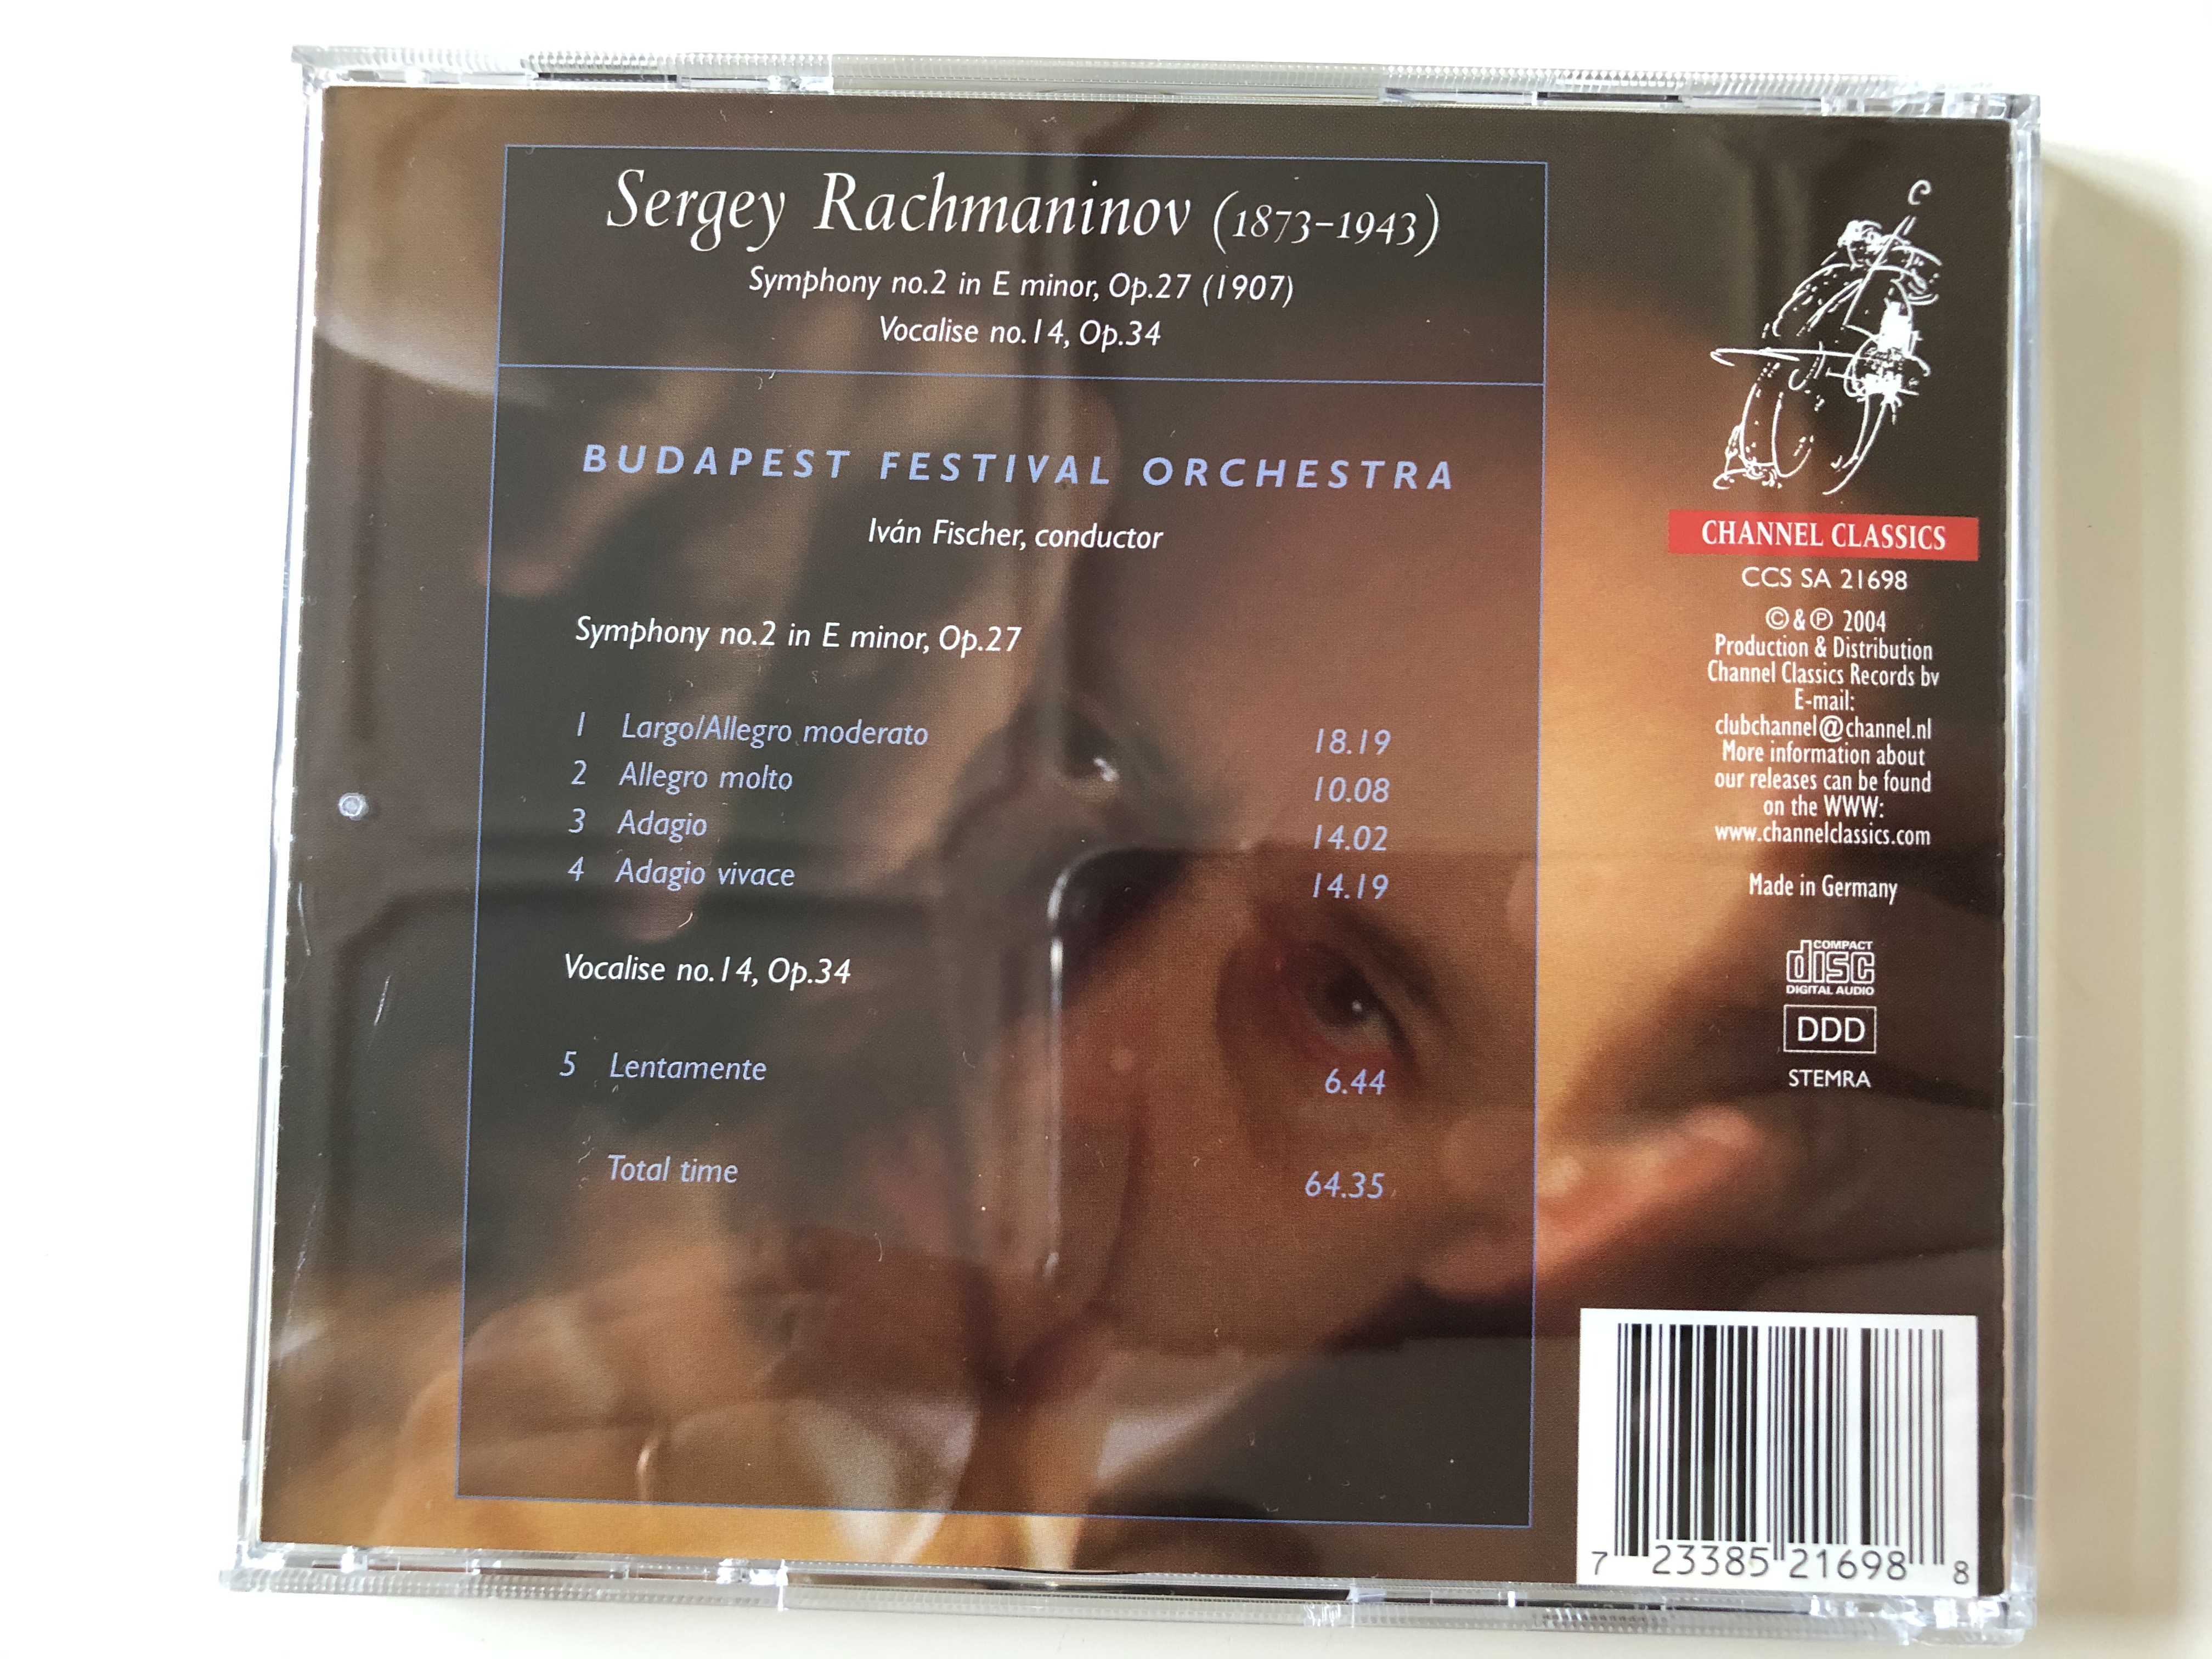 rachmaninov-symphony-no.-2-in-e-minor-op.-27-vocalise-no.-14-op.-34-iv-n-fischer-budapest-festival-orchestra-channel-classics-audio-cd-2004-ccs-sa-21698-10-.jpg